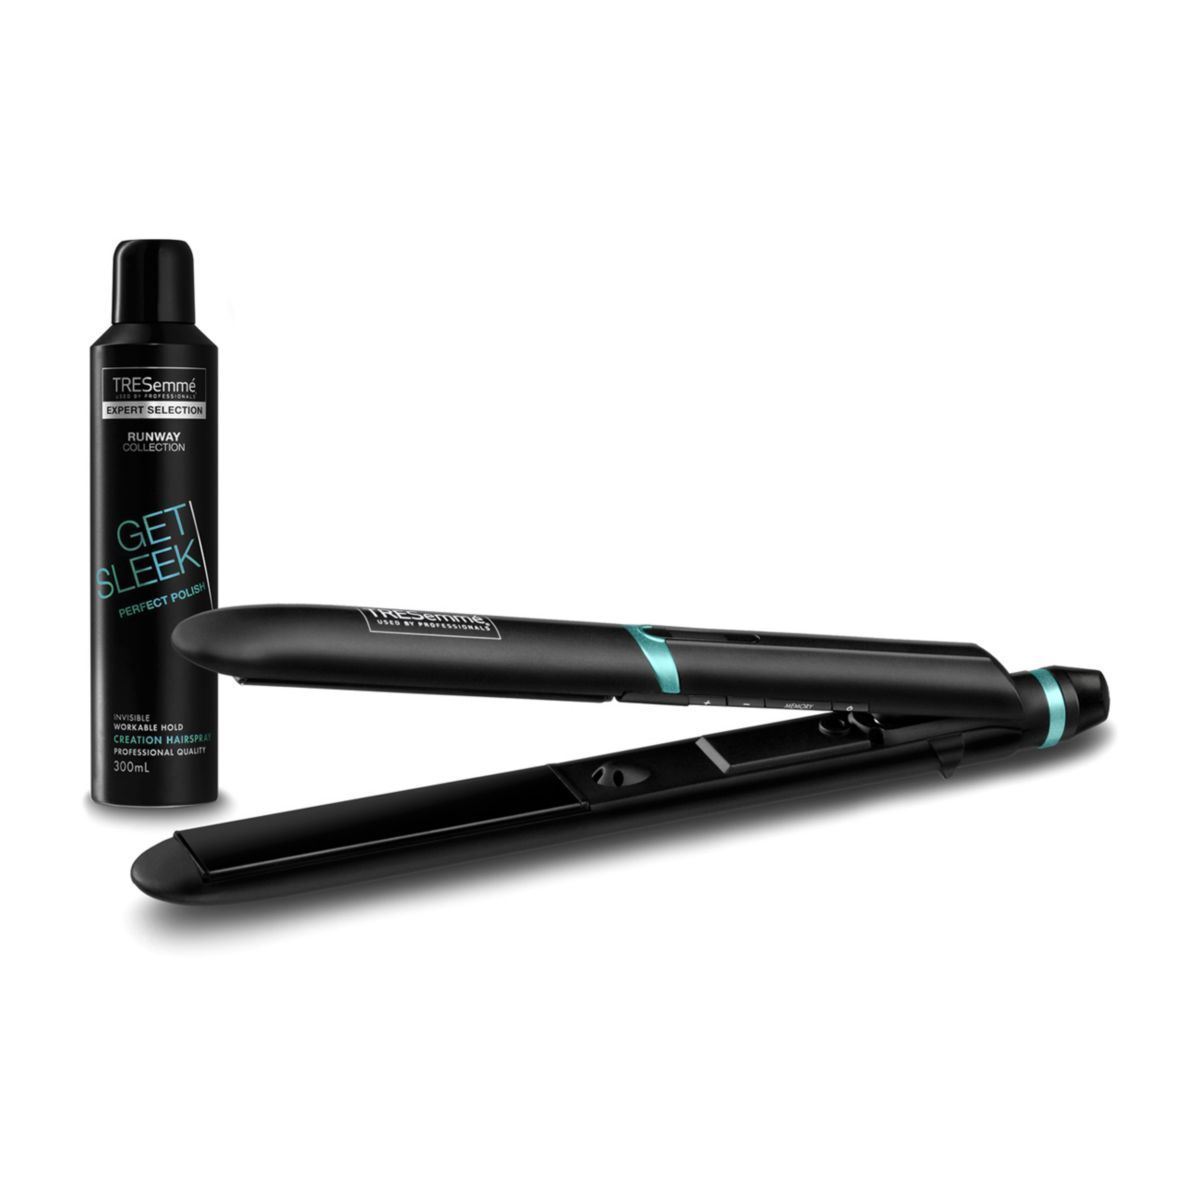 TRESemme Runway Collection Hair Straightener with Hairspray - Black | 2145DU from TRESemme - DID Electrical